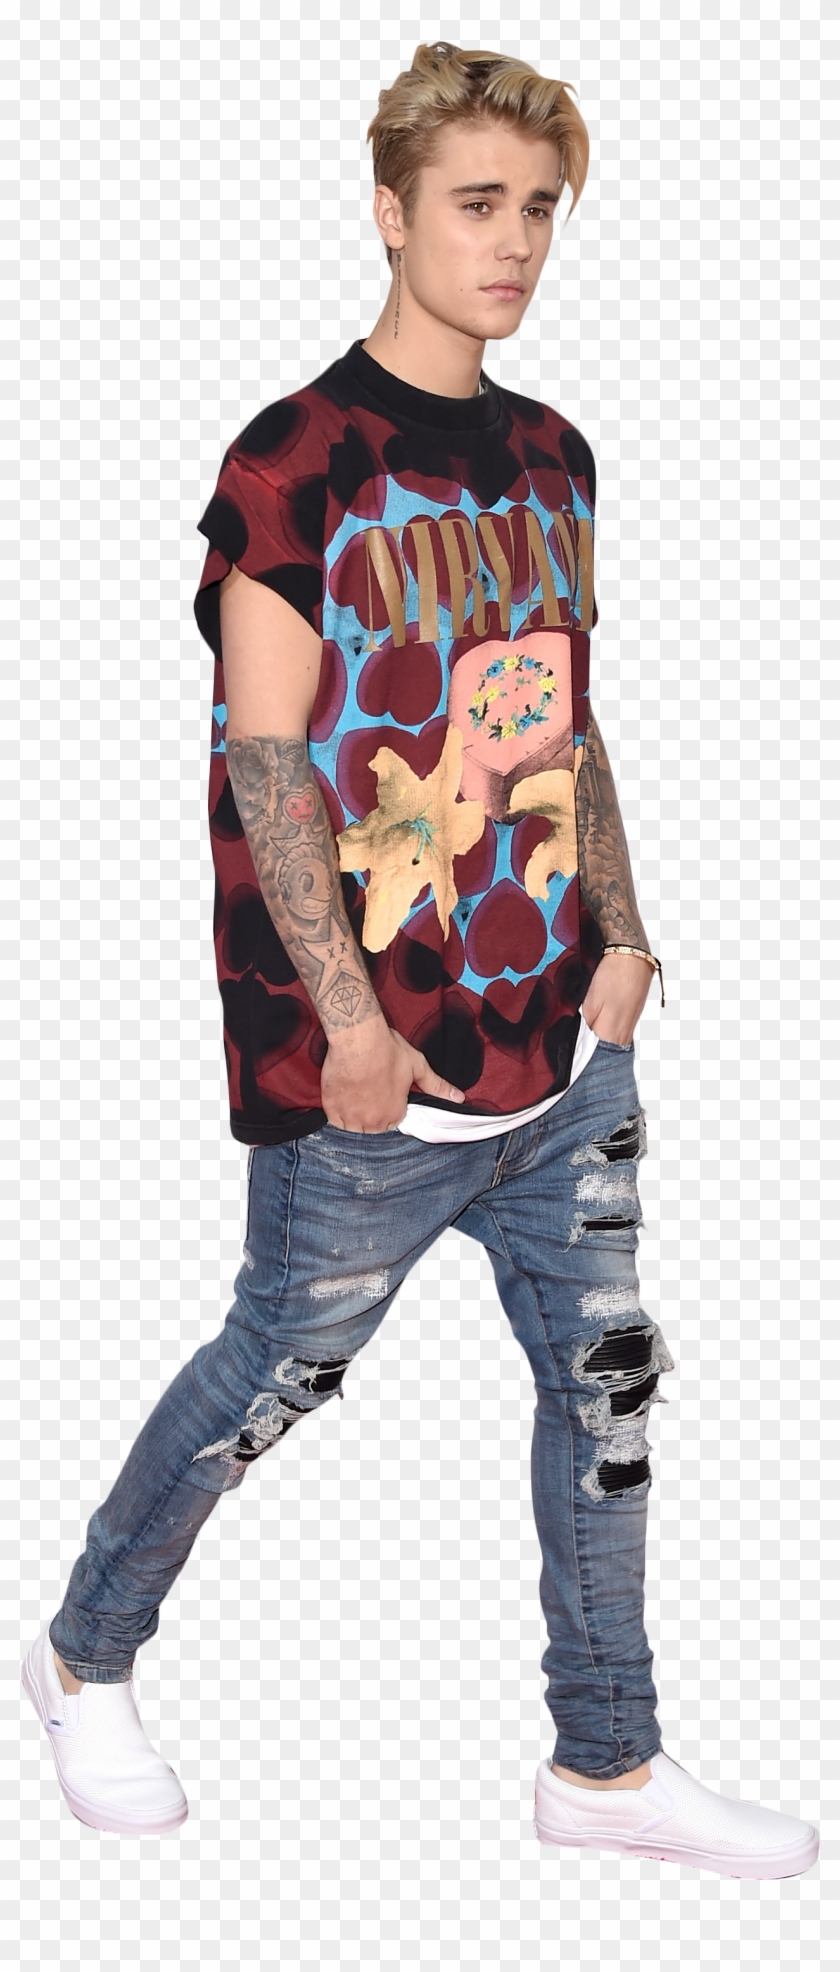 Justin Bieber Relaxed Png Image Clipart